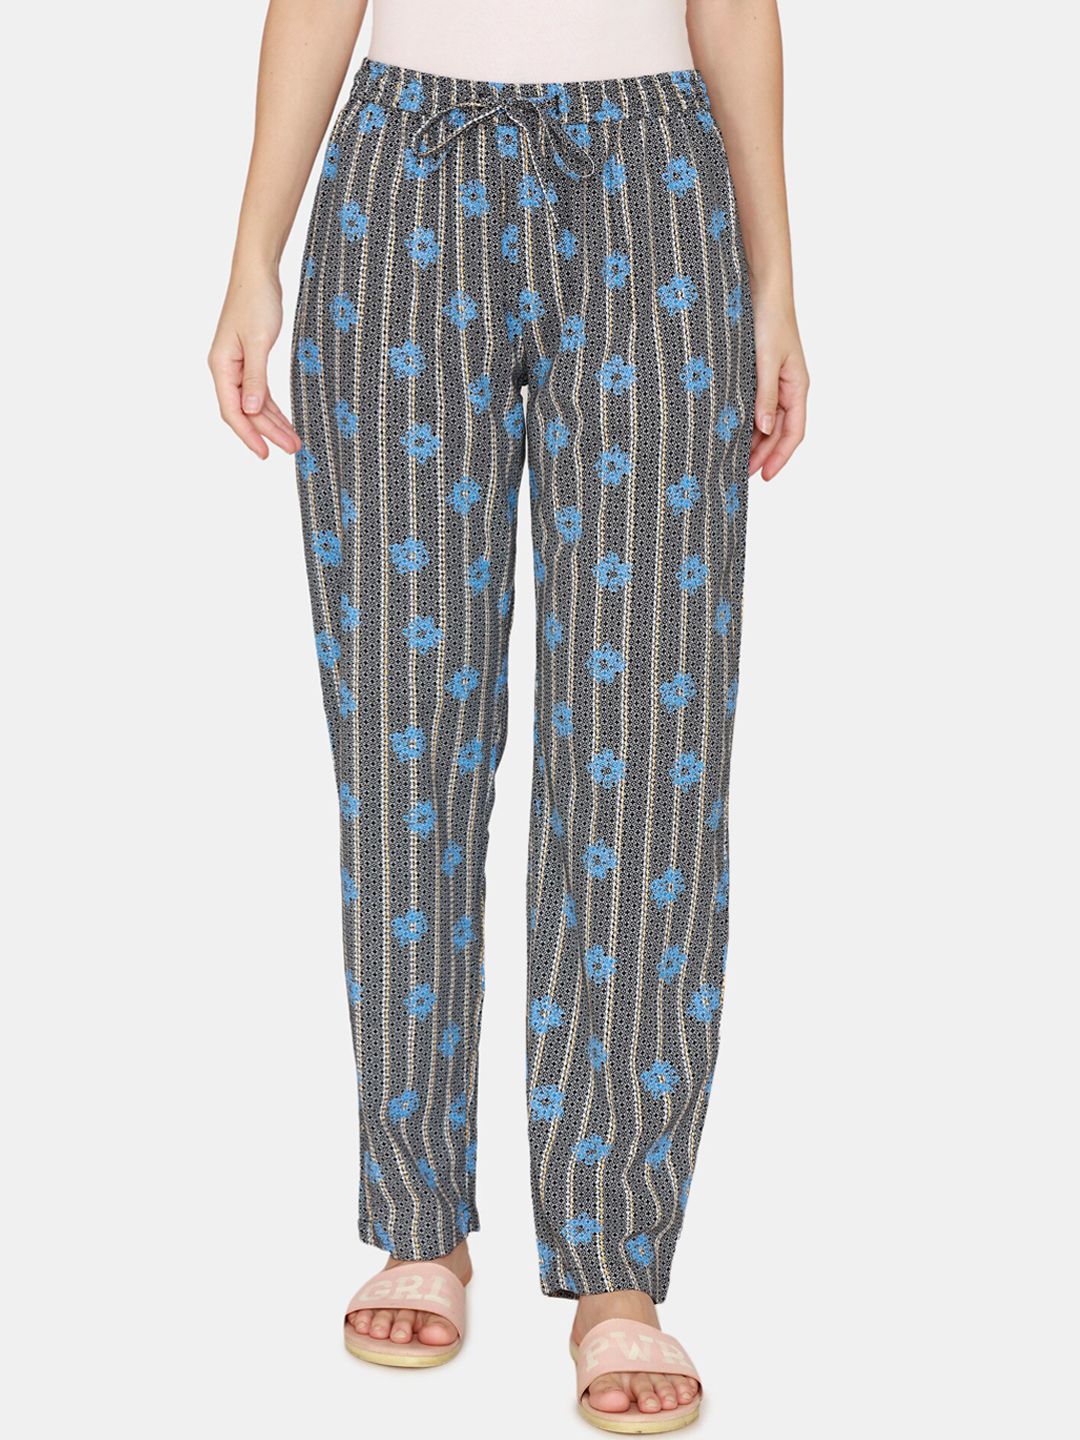 Coucou by Zivame Women Blue & Grey Printed Pure Cotton Pyjamas Price in India